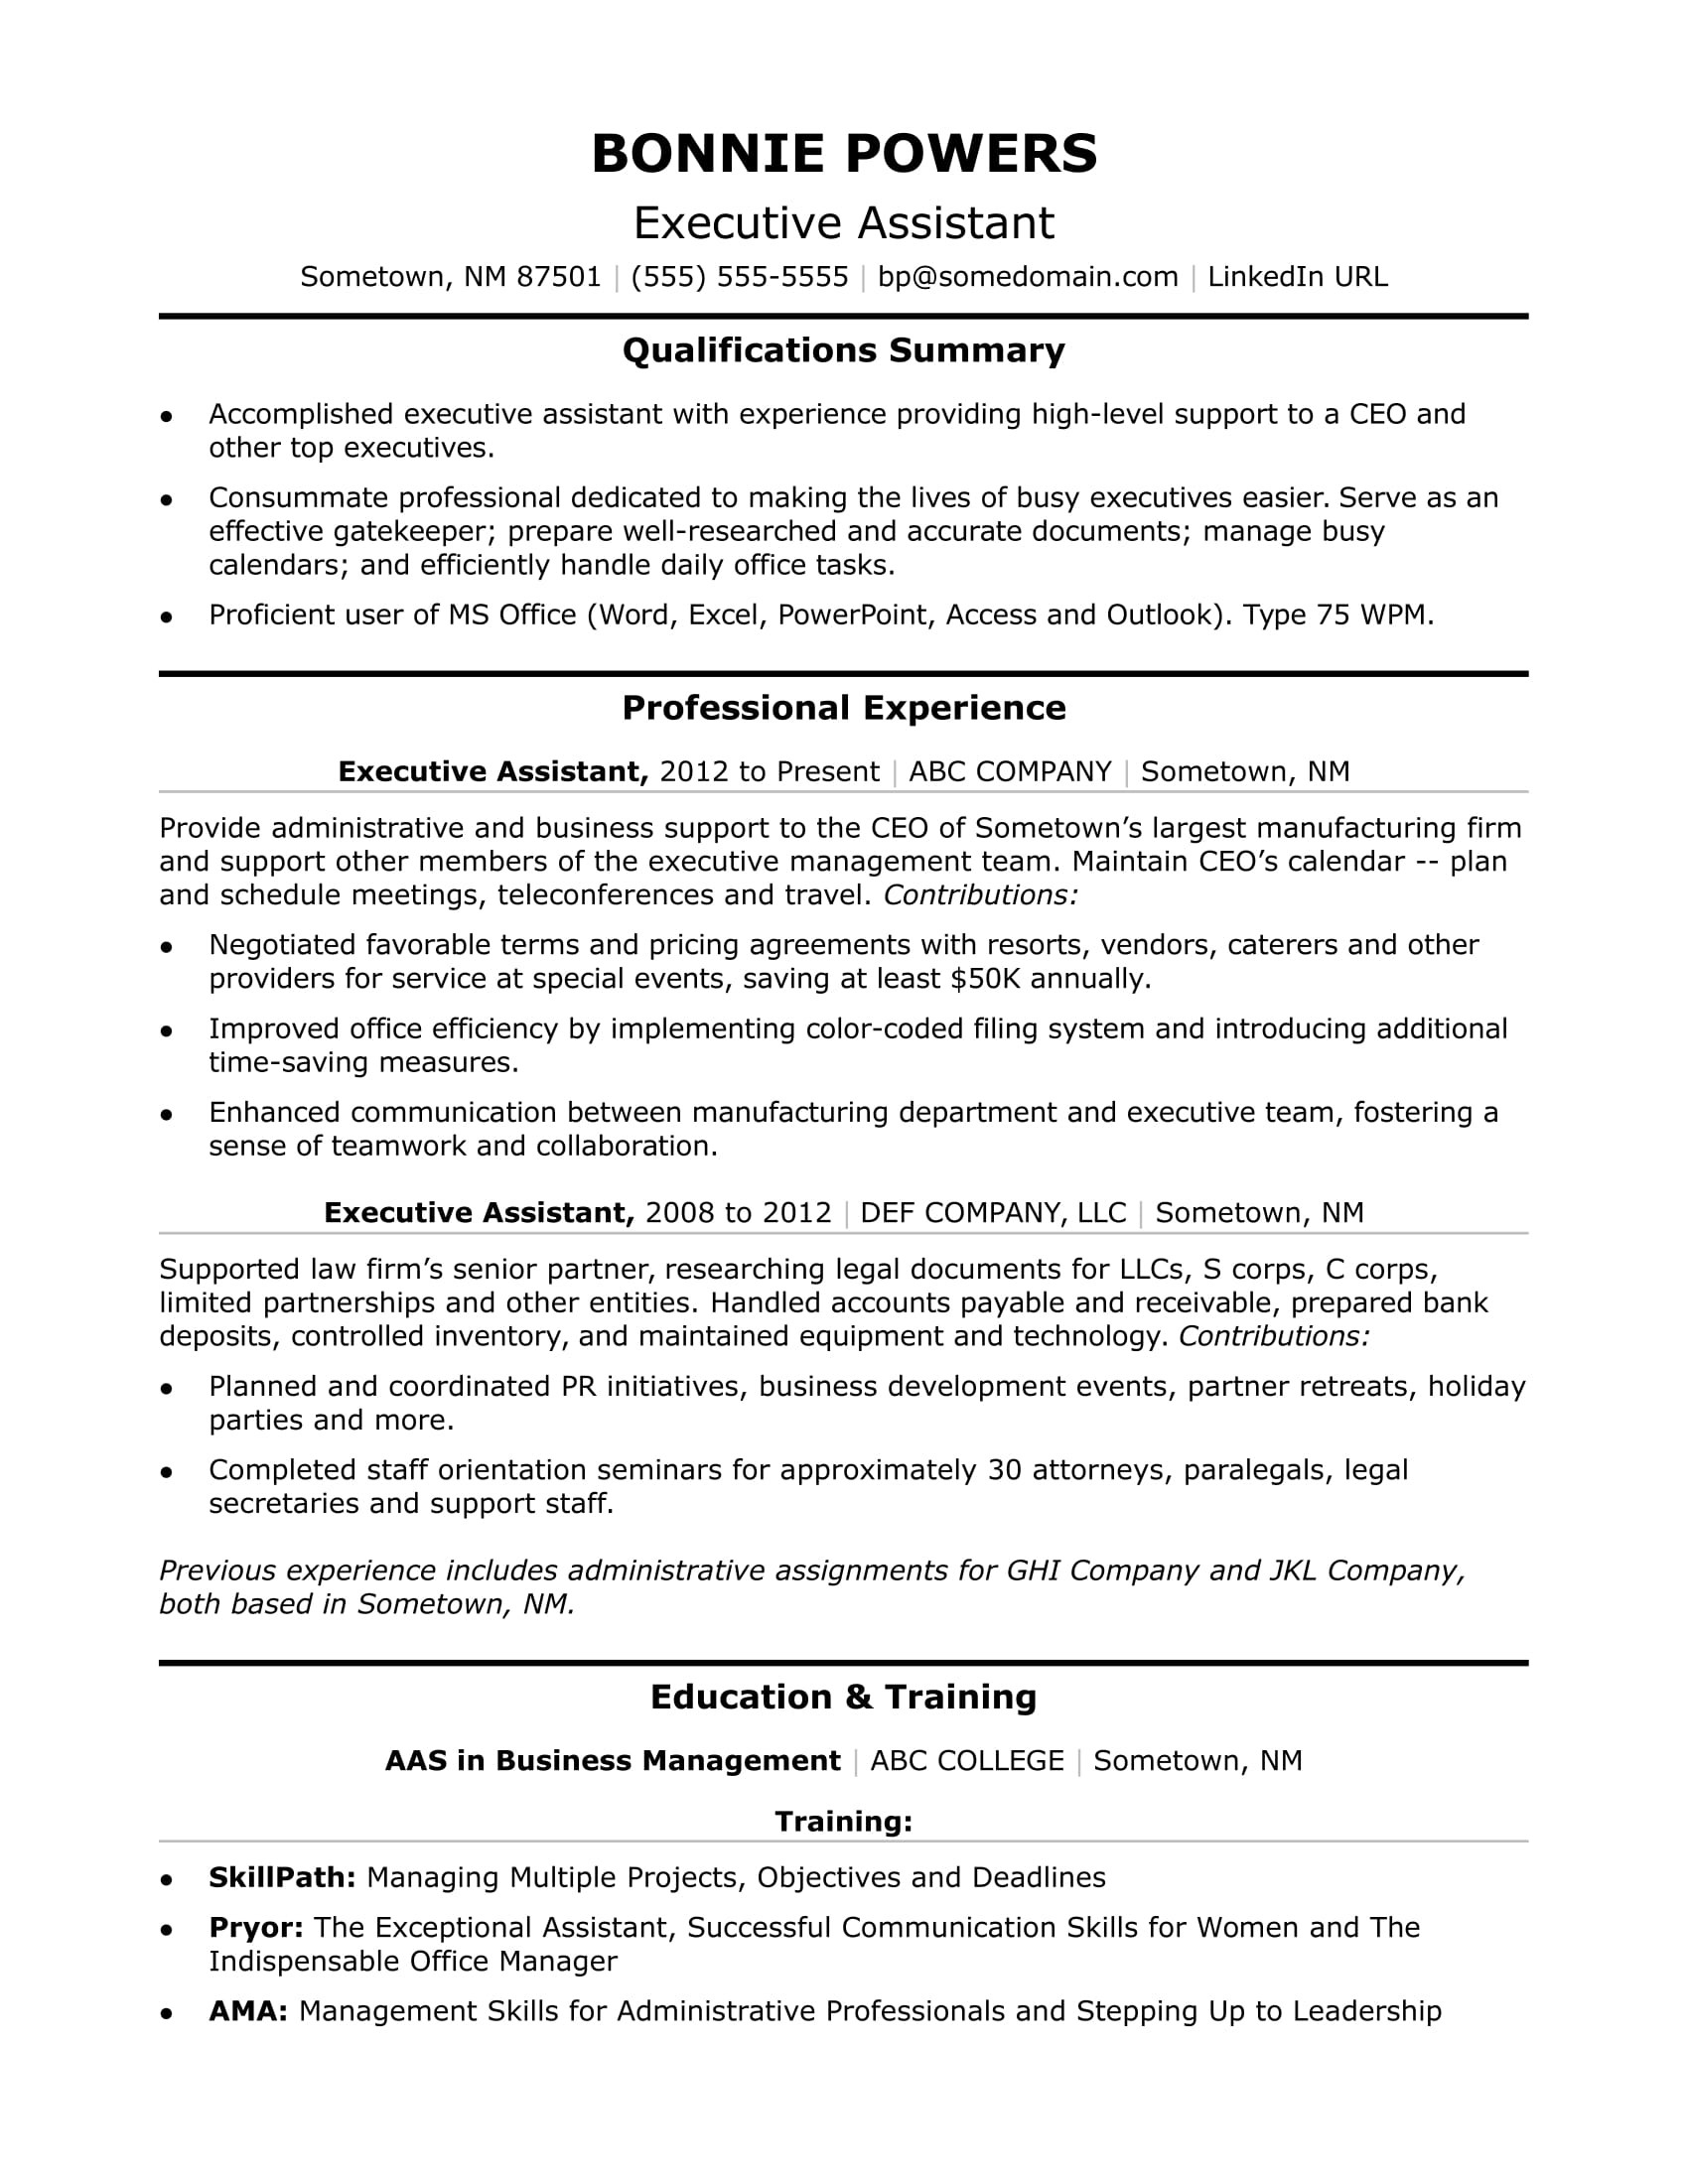 Sample Resume for Executive assistant to President Executive Administrative assistant Resume Sample